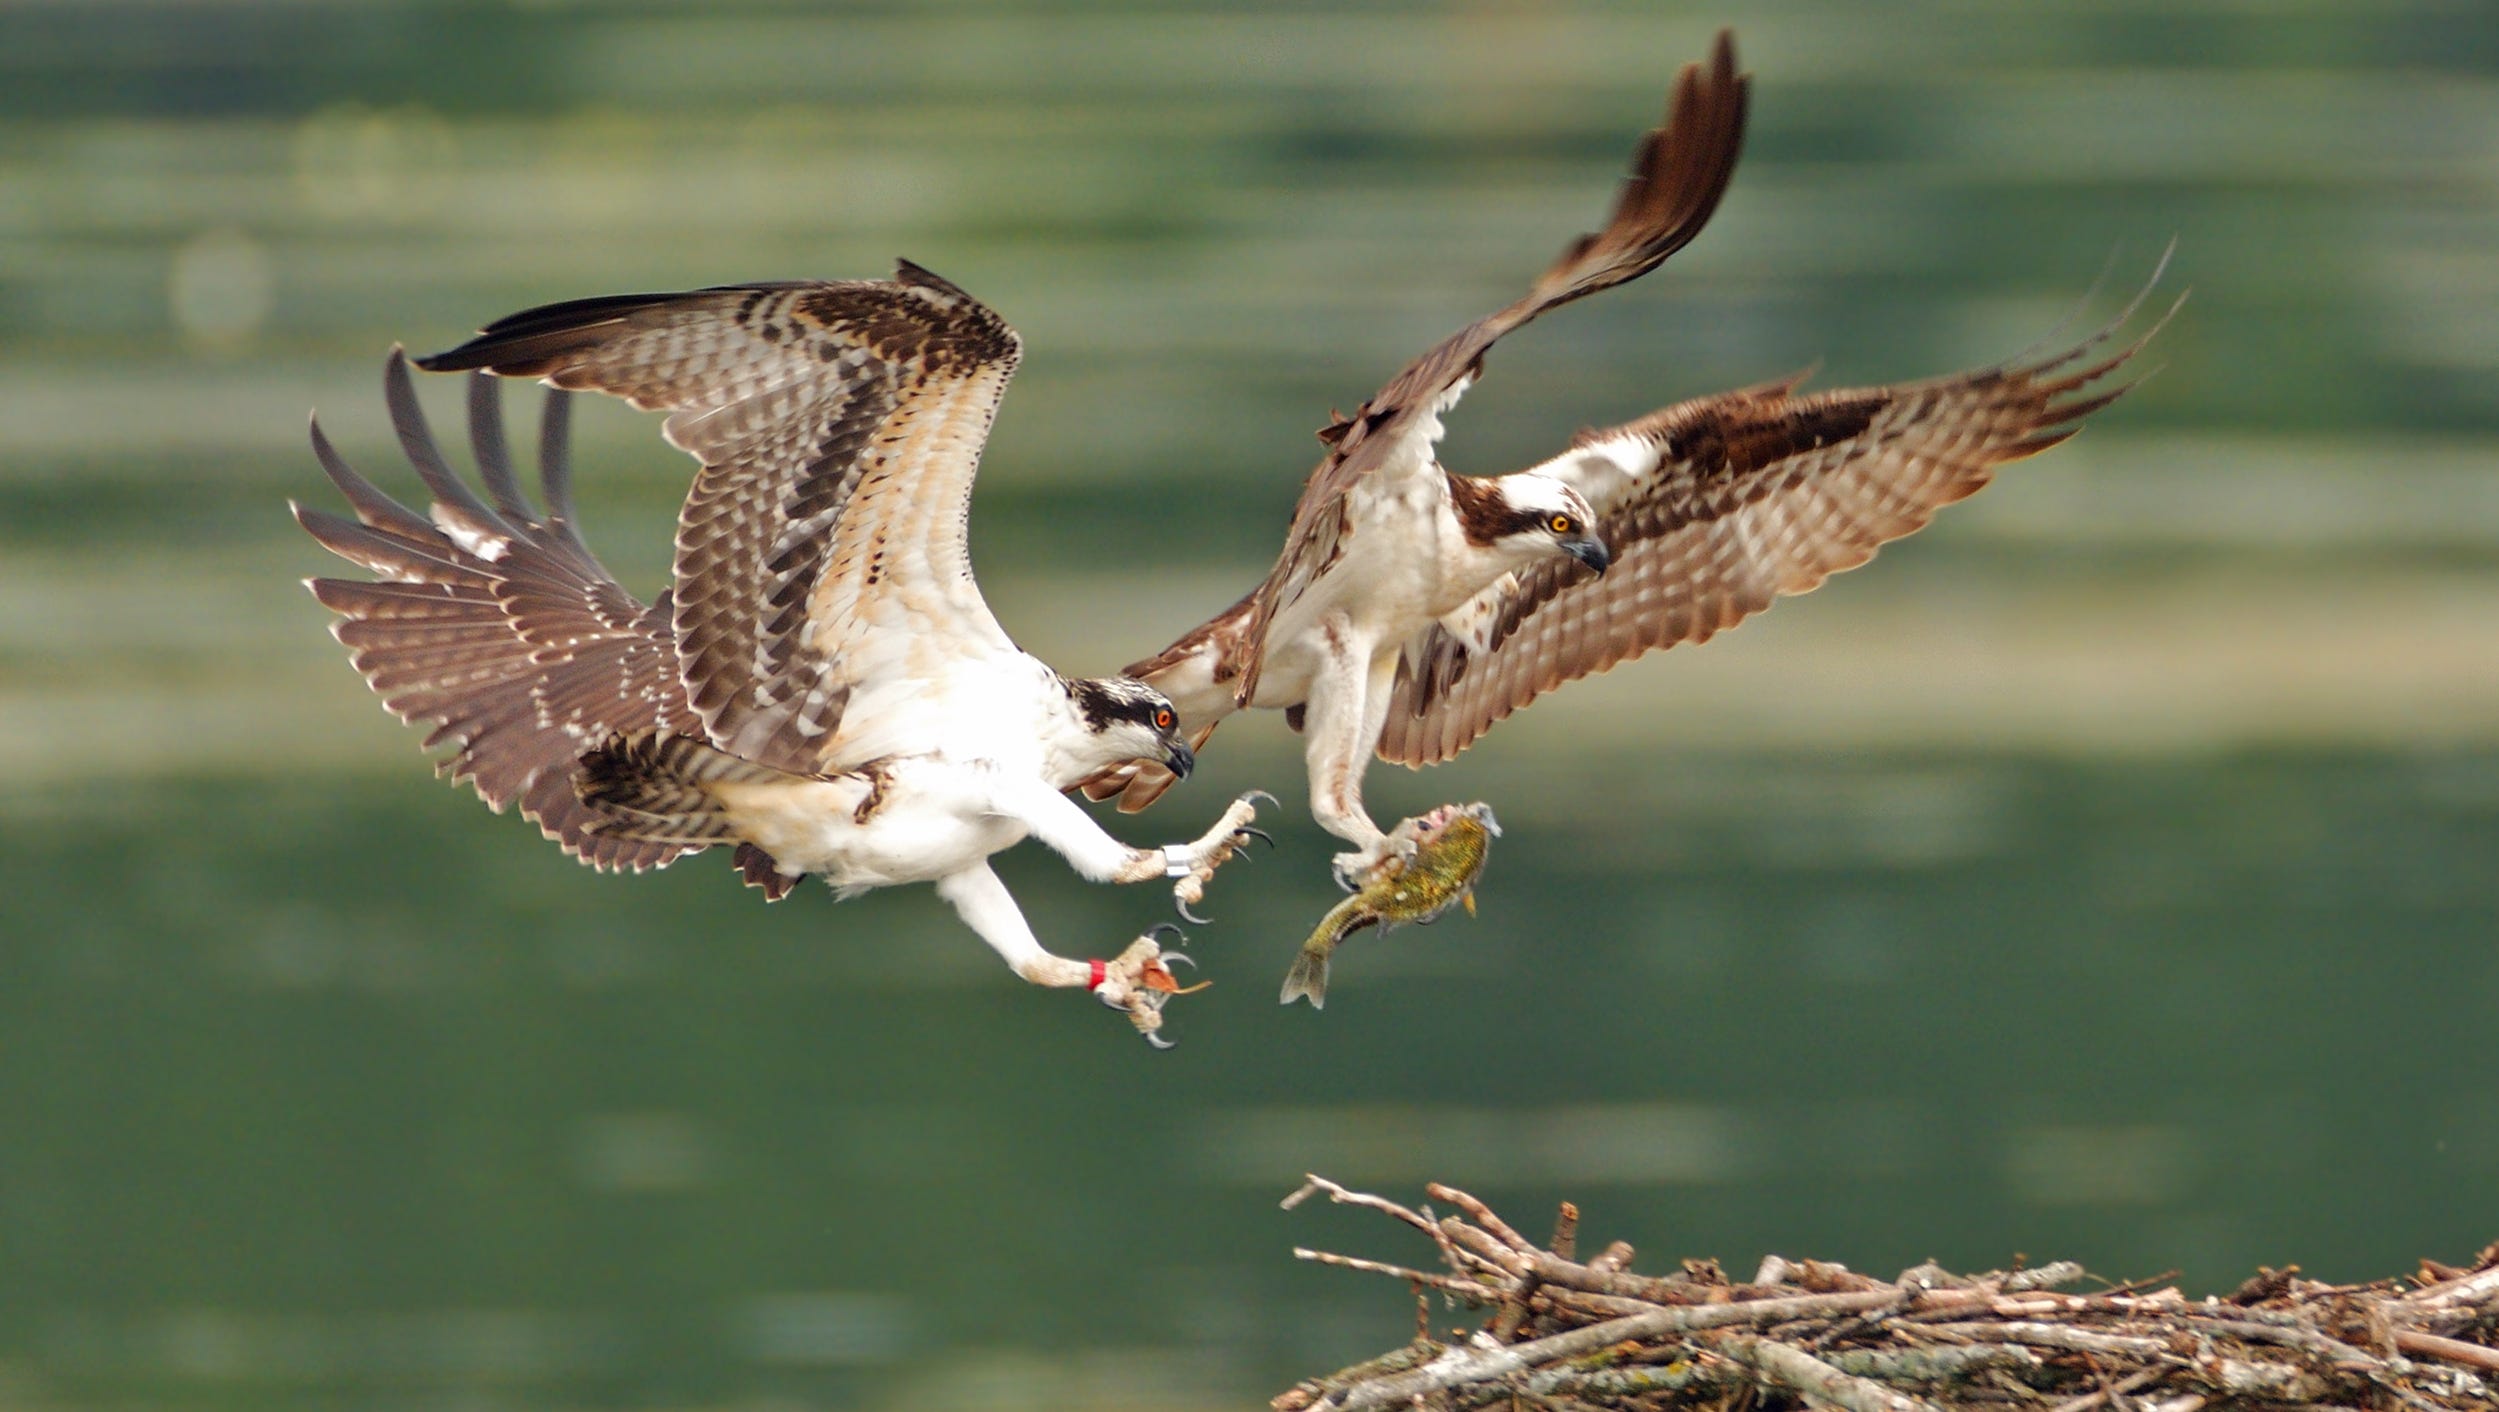 Bird watcher John Xu of Novi waited more than three hours near an osprey nest at Kensington Metro Park for the money shot, which he titled "I Can't Wait." "It was a great moment to see the mother osprey flying back (to her chicks) with a fish," Xu said.